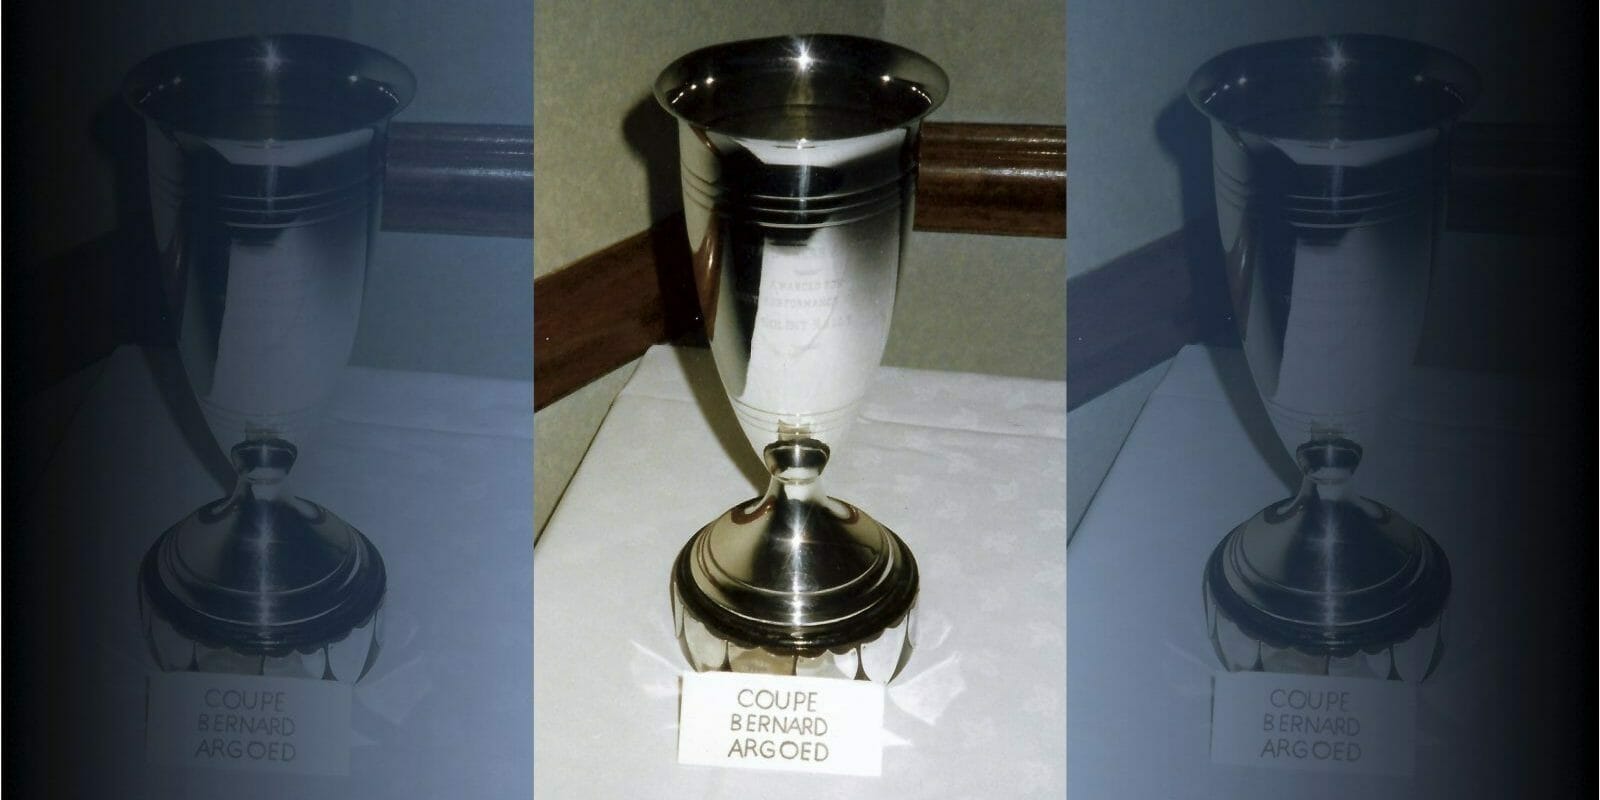 Coupe Bernard Argod - a cup presented by Bernard Argod for the Cross Channel Race in 1961. Later awarded for various other reasons